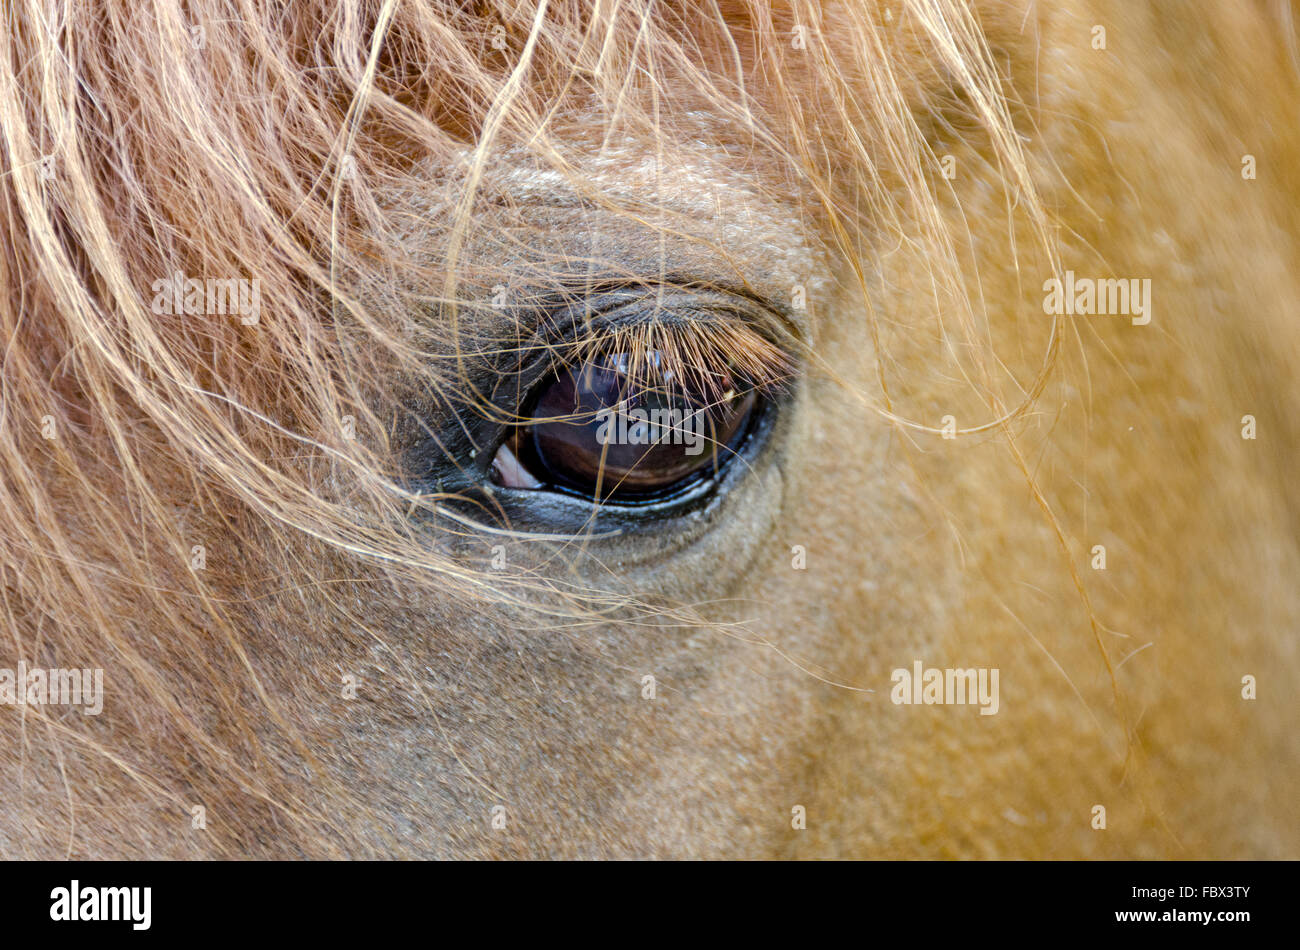 Eye of a ligth brown horse Stock Photo